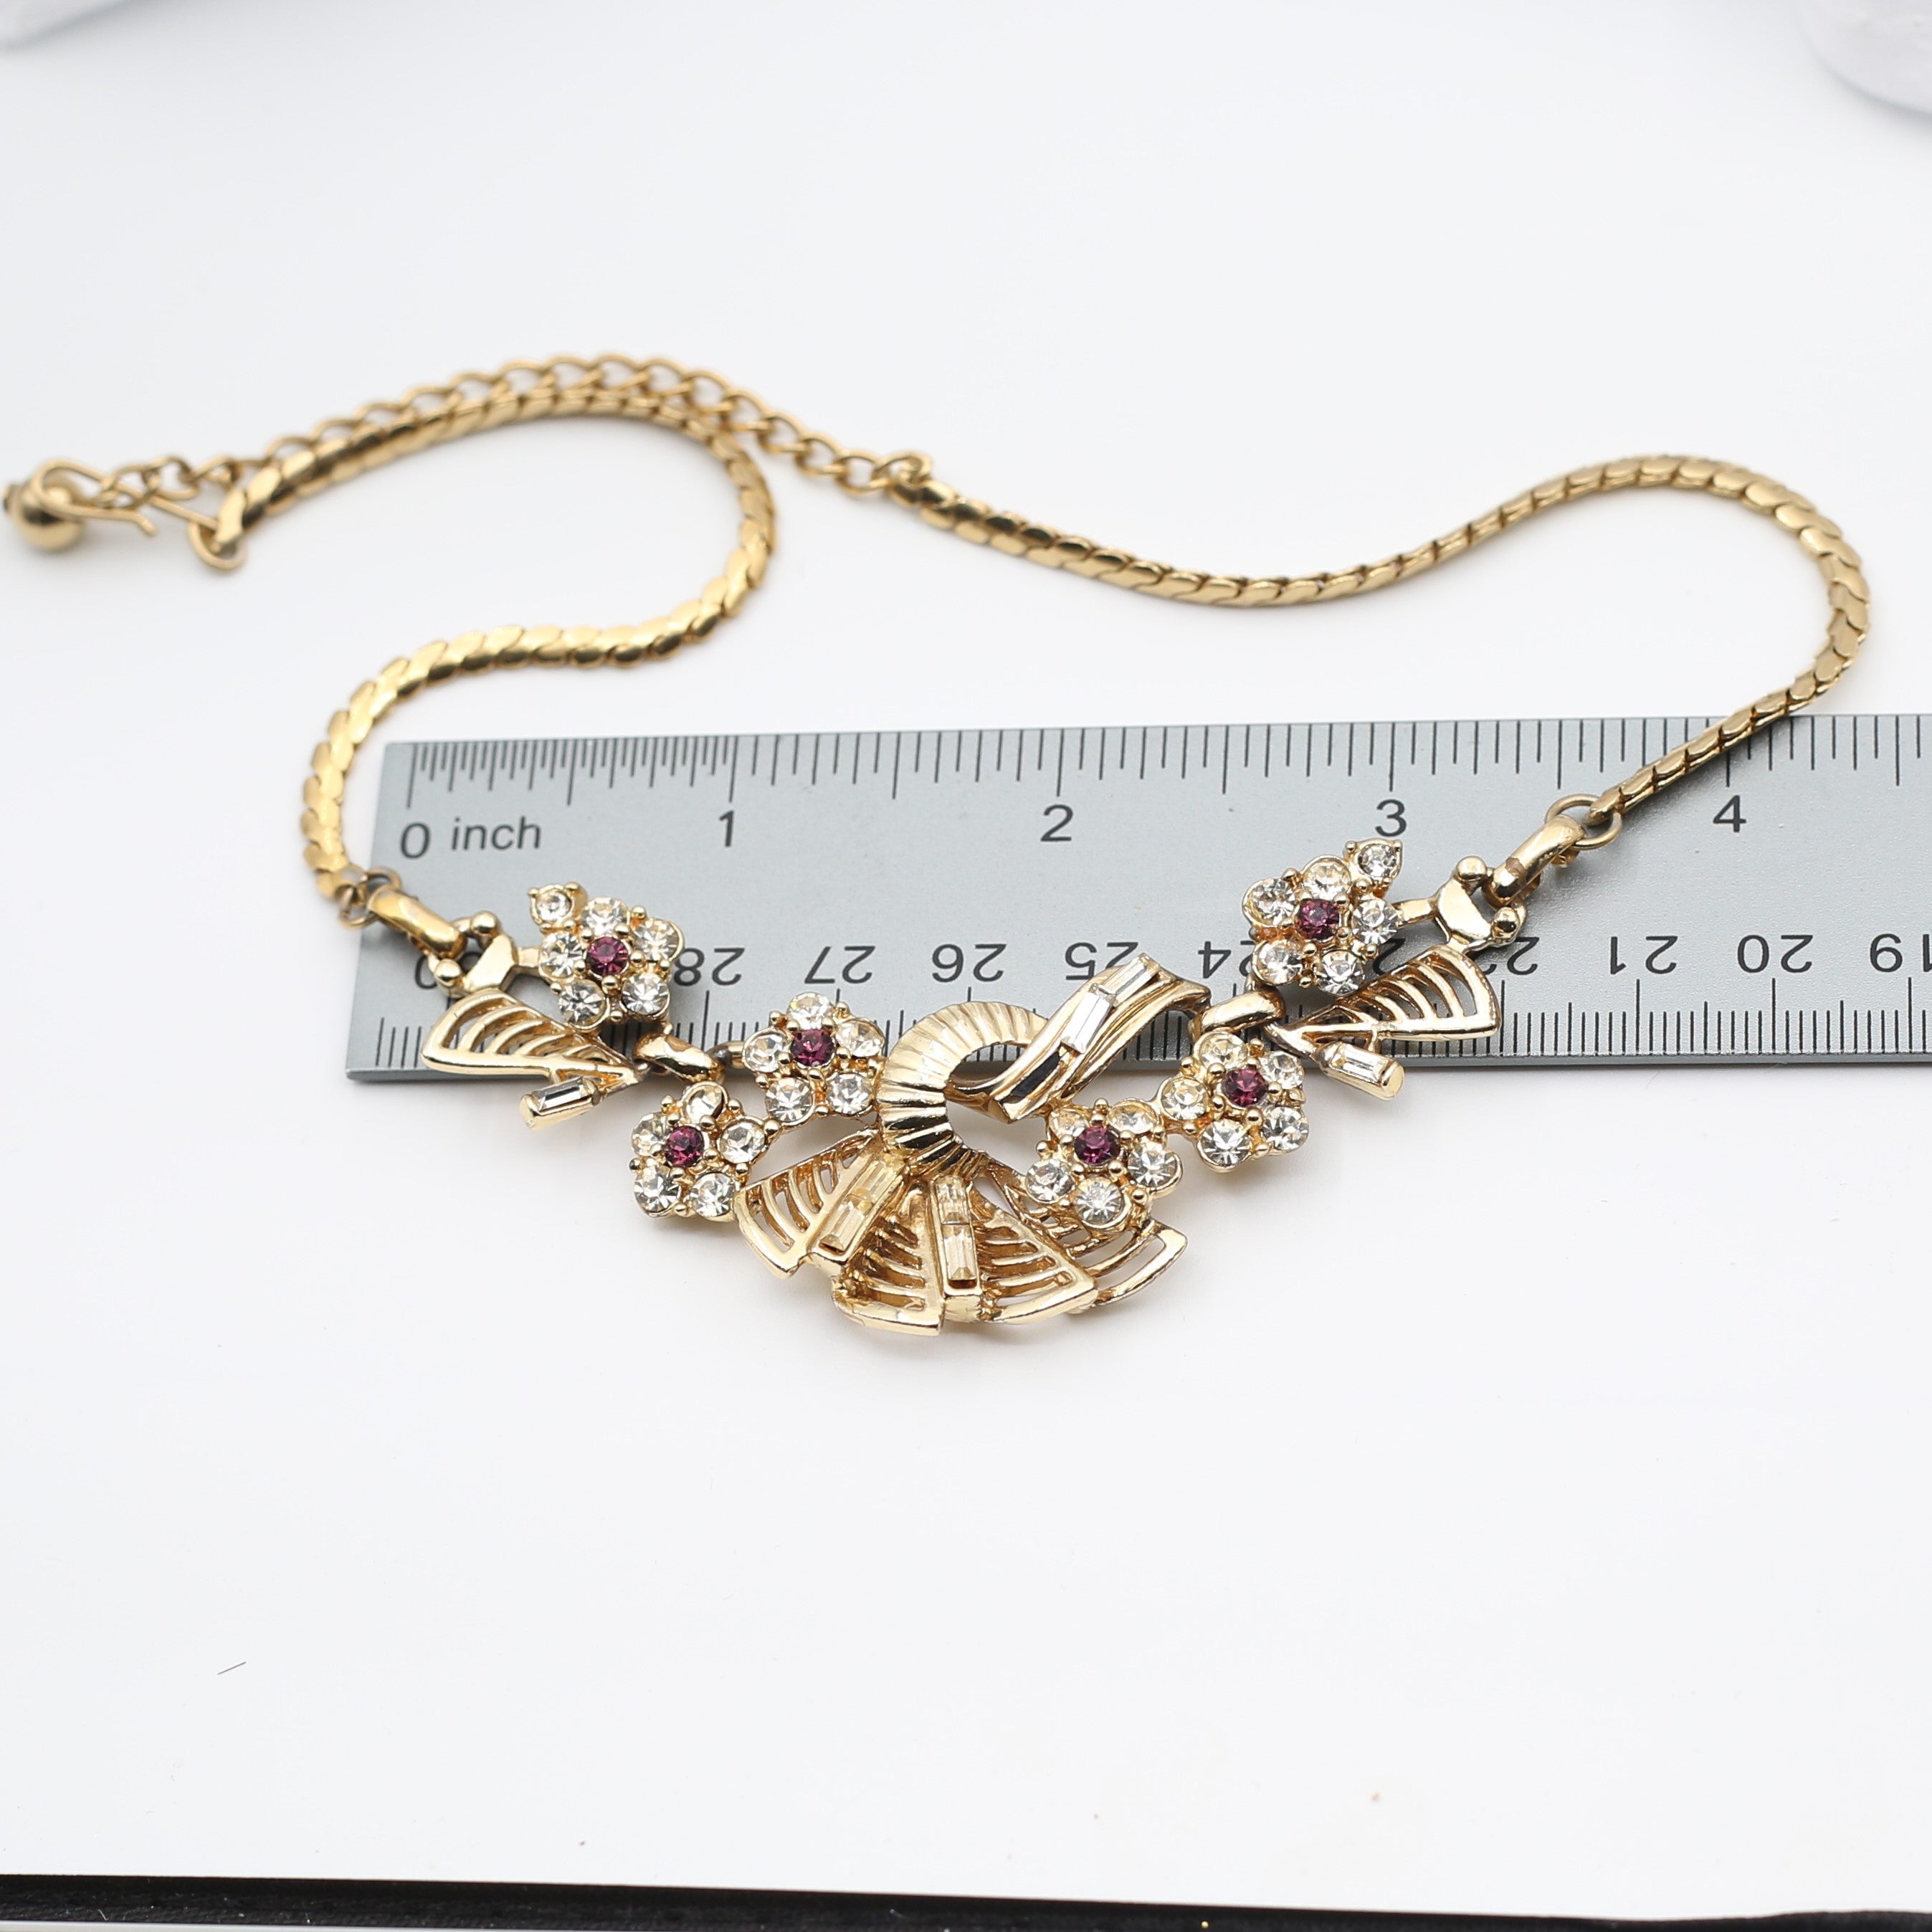 Intricate gold-plated necklace with rhinestones